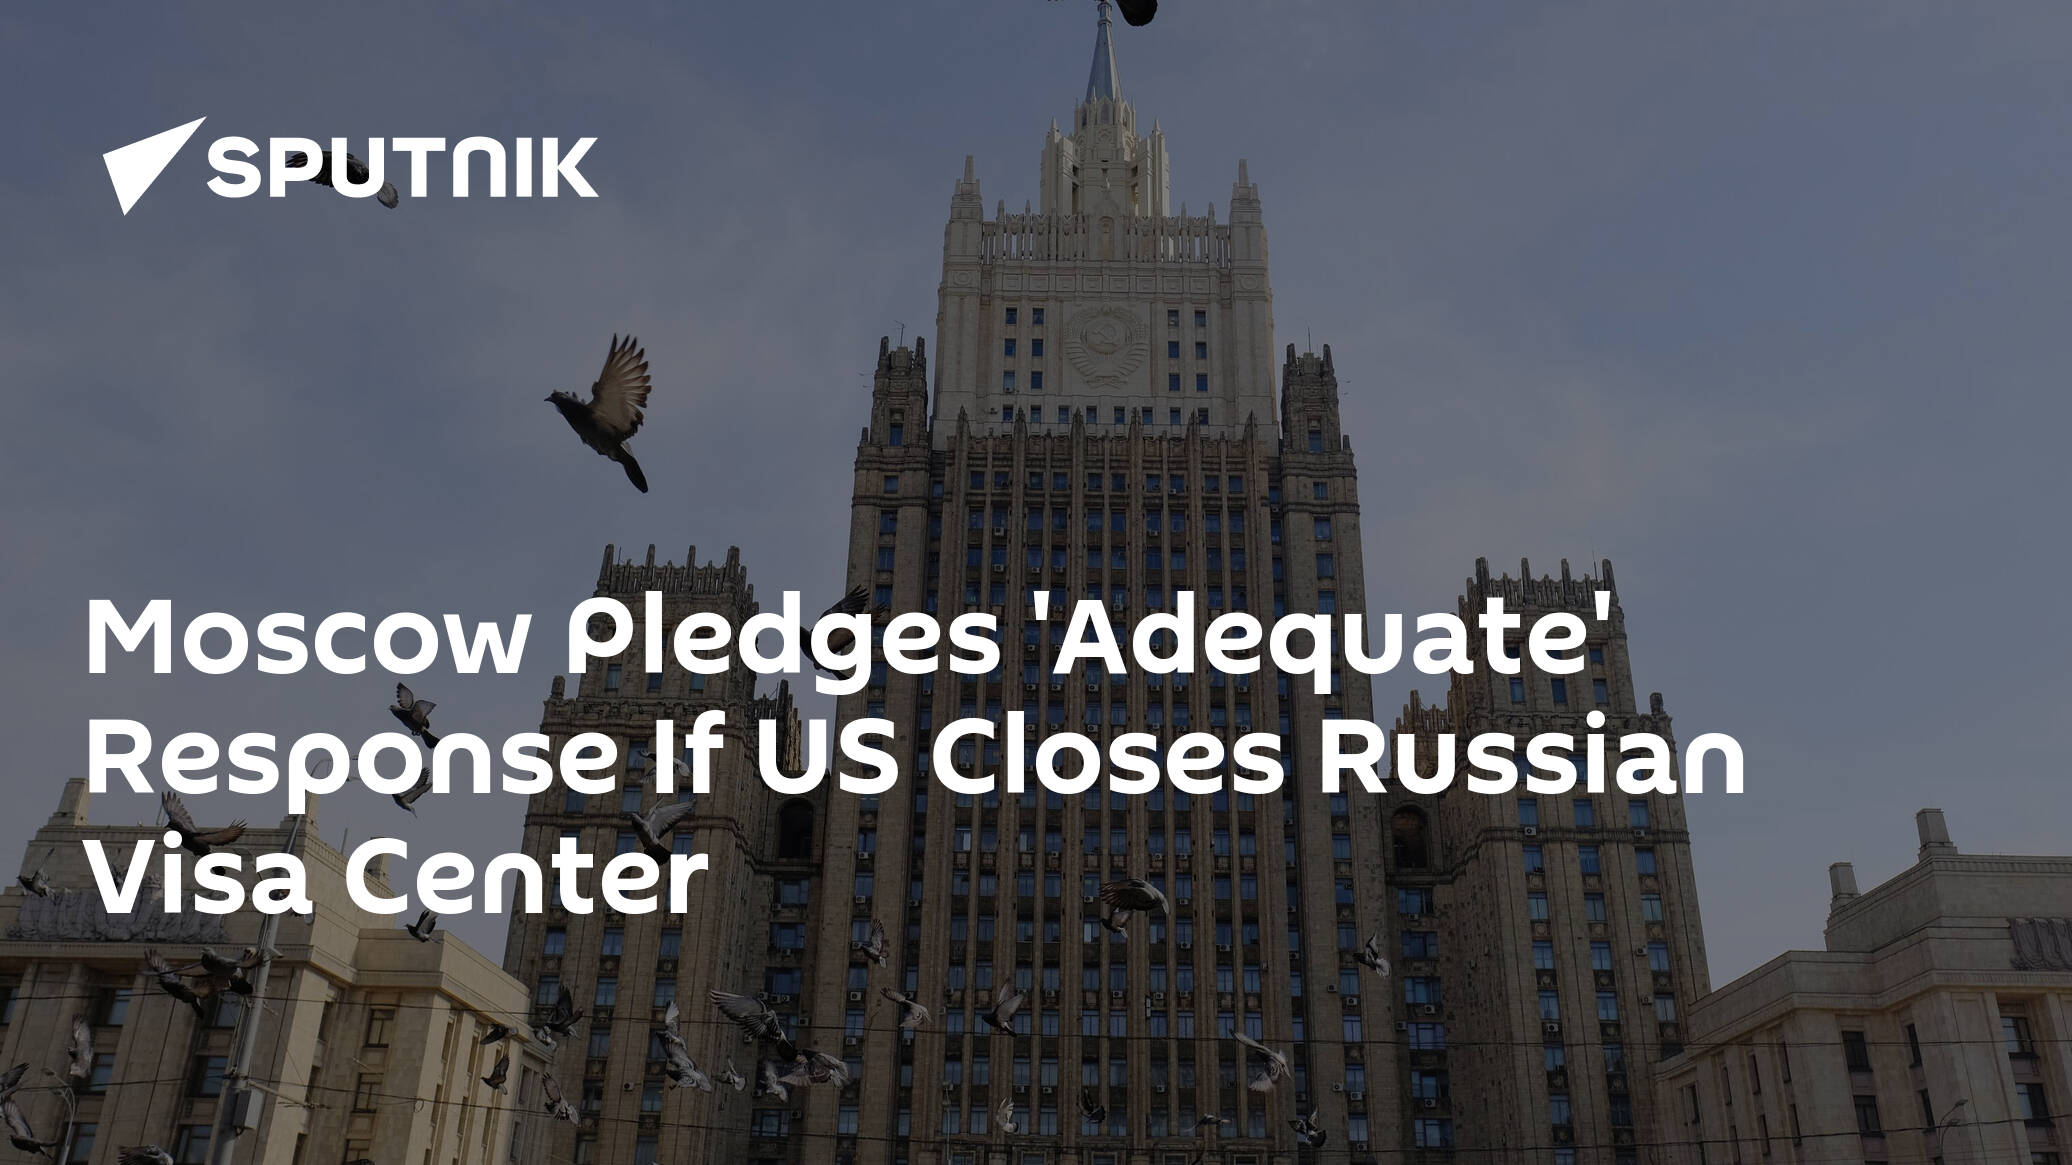 Moscow Pledges 'Adequate' Response If US Closes Russian Visa Center